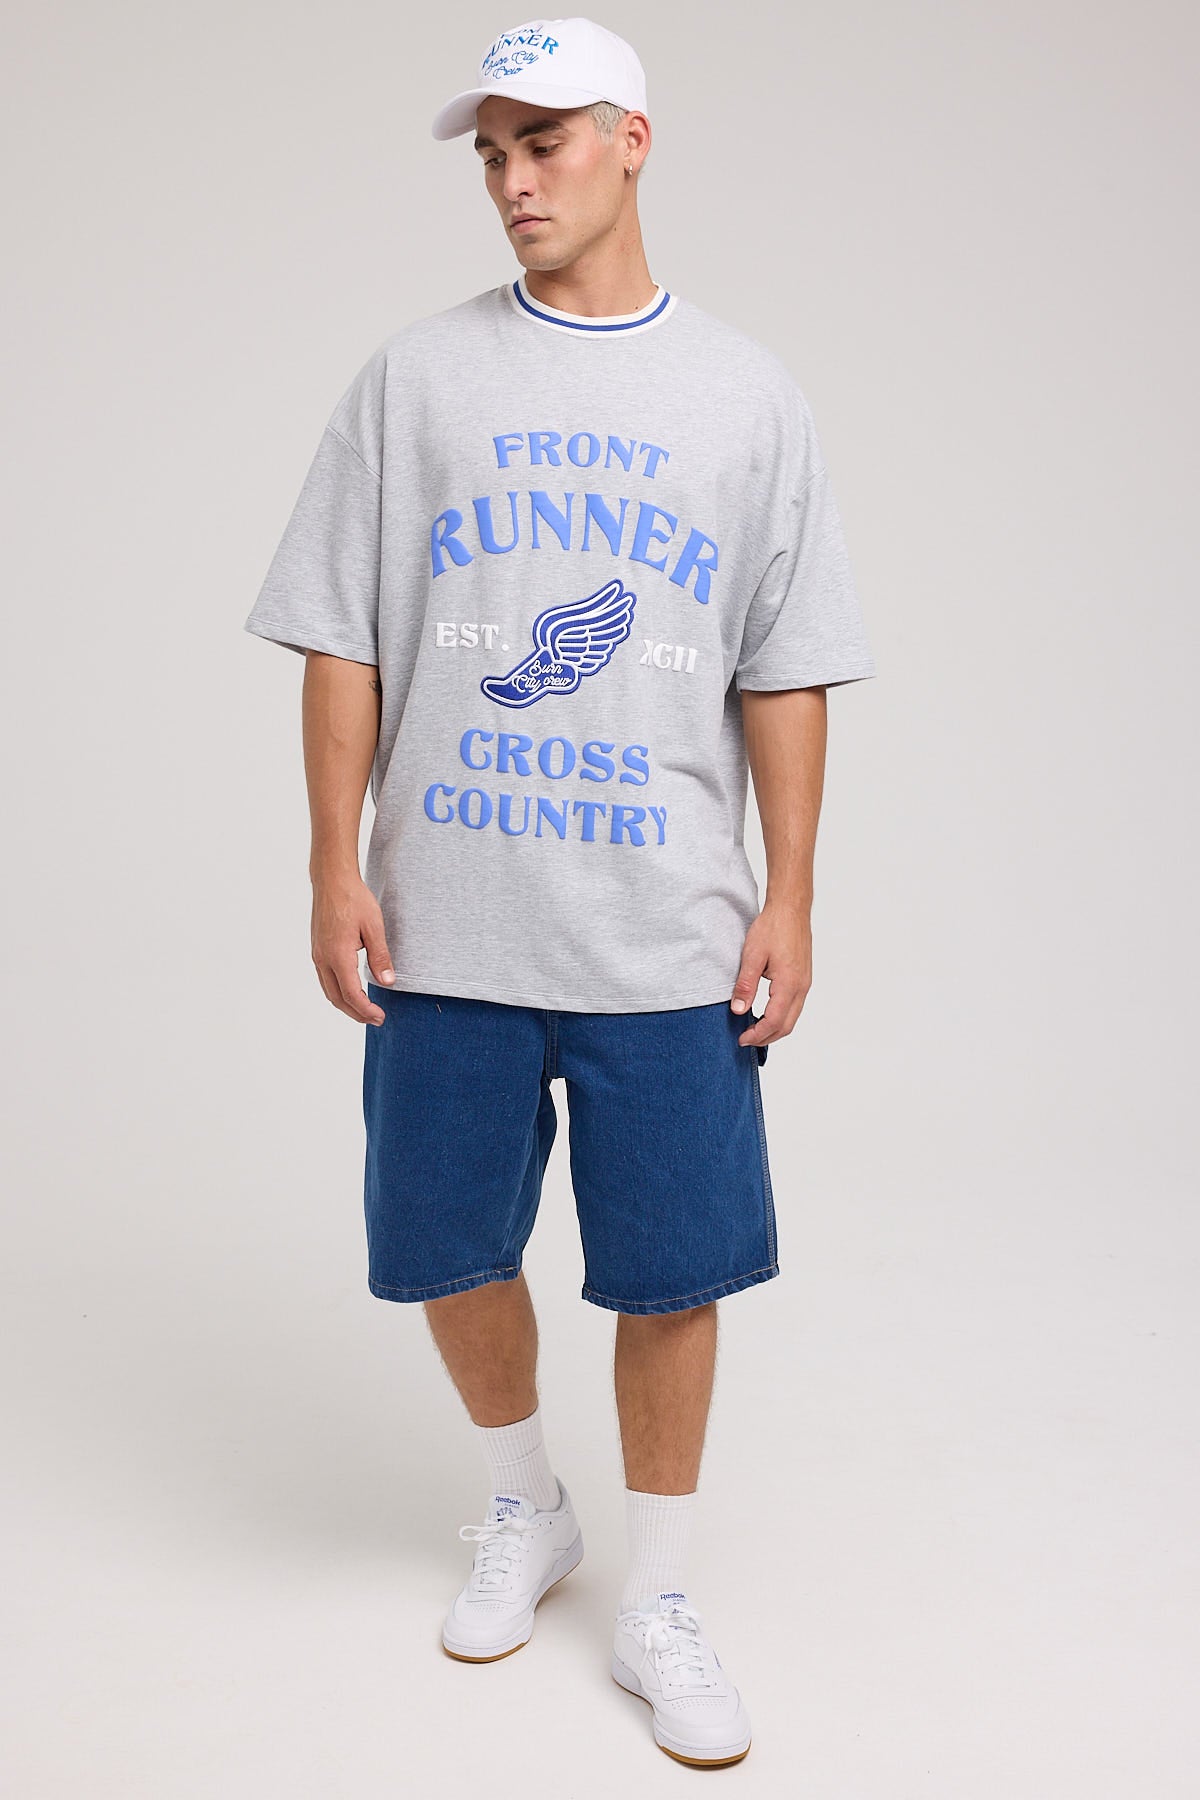 Front Runner Cross Country Tee Grey Marle